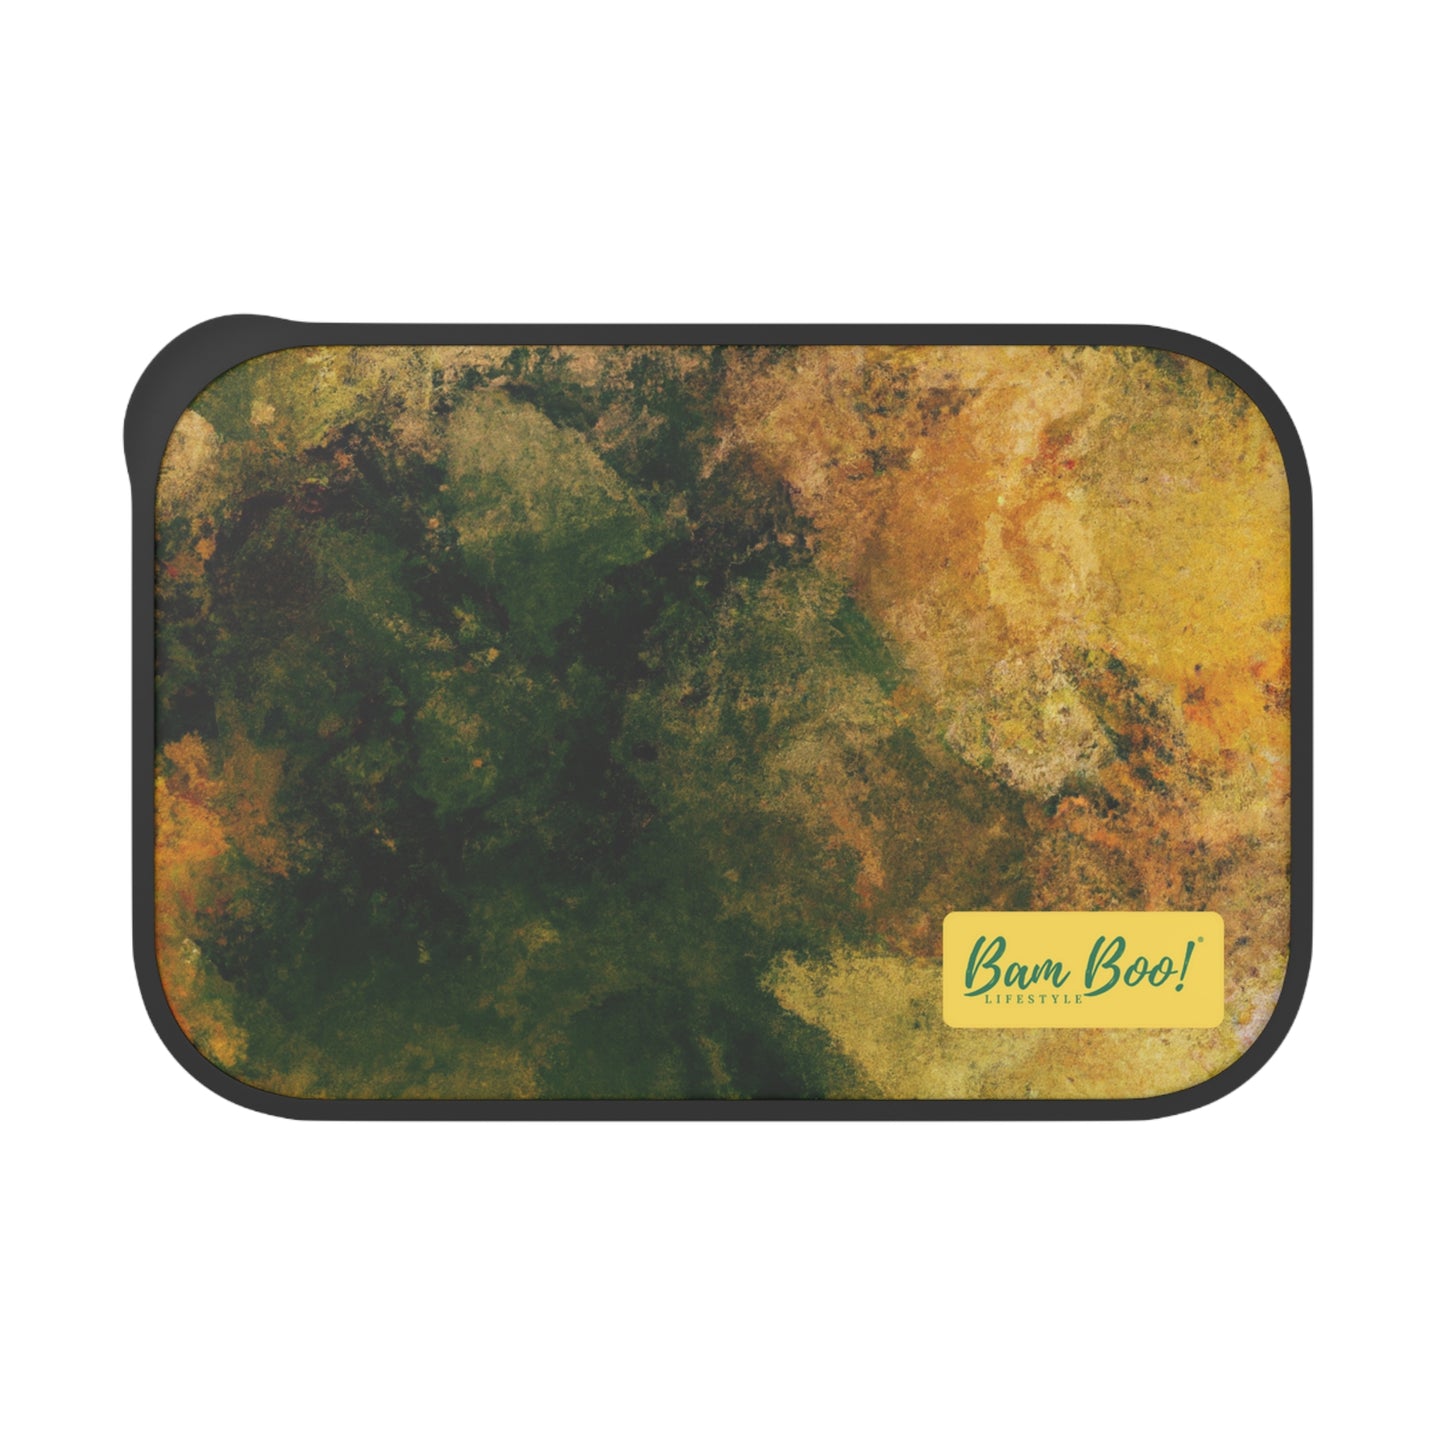 “Nature in Harmony: A Harmonic Abstract Artpiece.” - Bam Boo! Lifestyle Eco-friendly PLA Bento Box with Band and Utensils